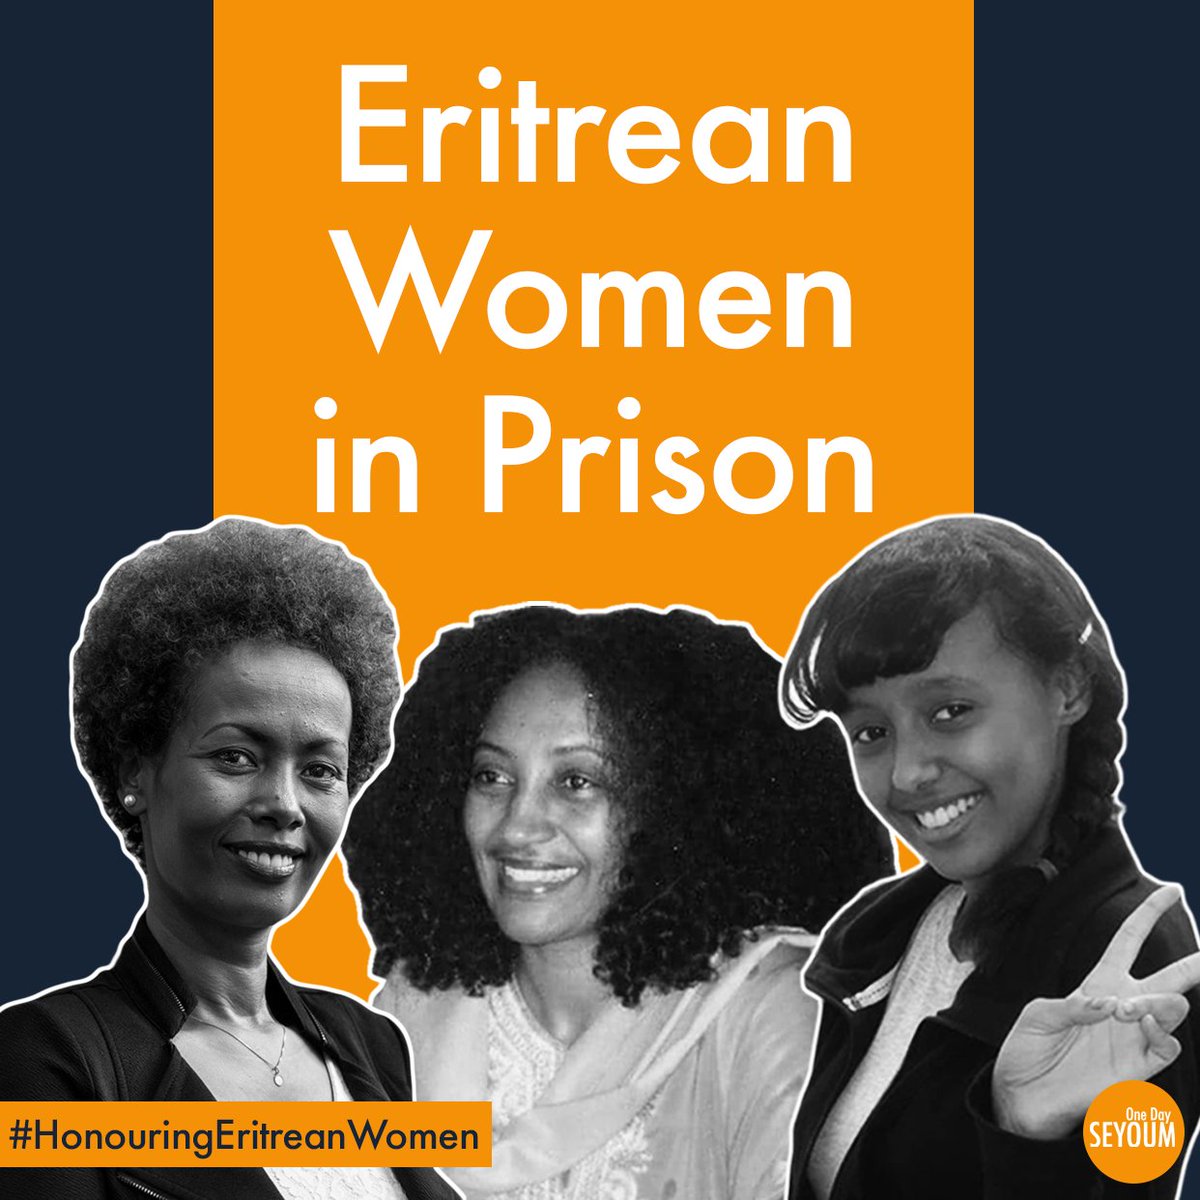 Ciham is not alone. There are countless people imprisoned without a trial in  #Eritrea. Many of them are women and girls who often times suffer more than their male counterparts. This thread tells the stories of five Eritrean women who are, or have been, imprisoned.  #YIAKL